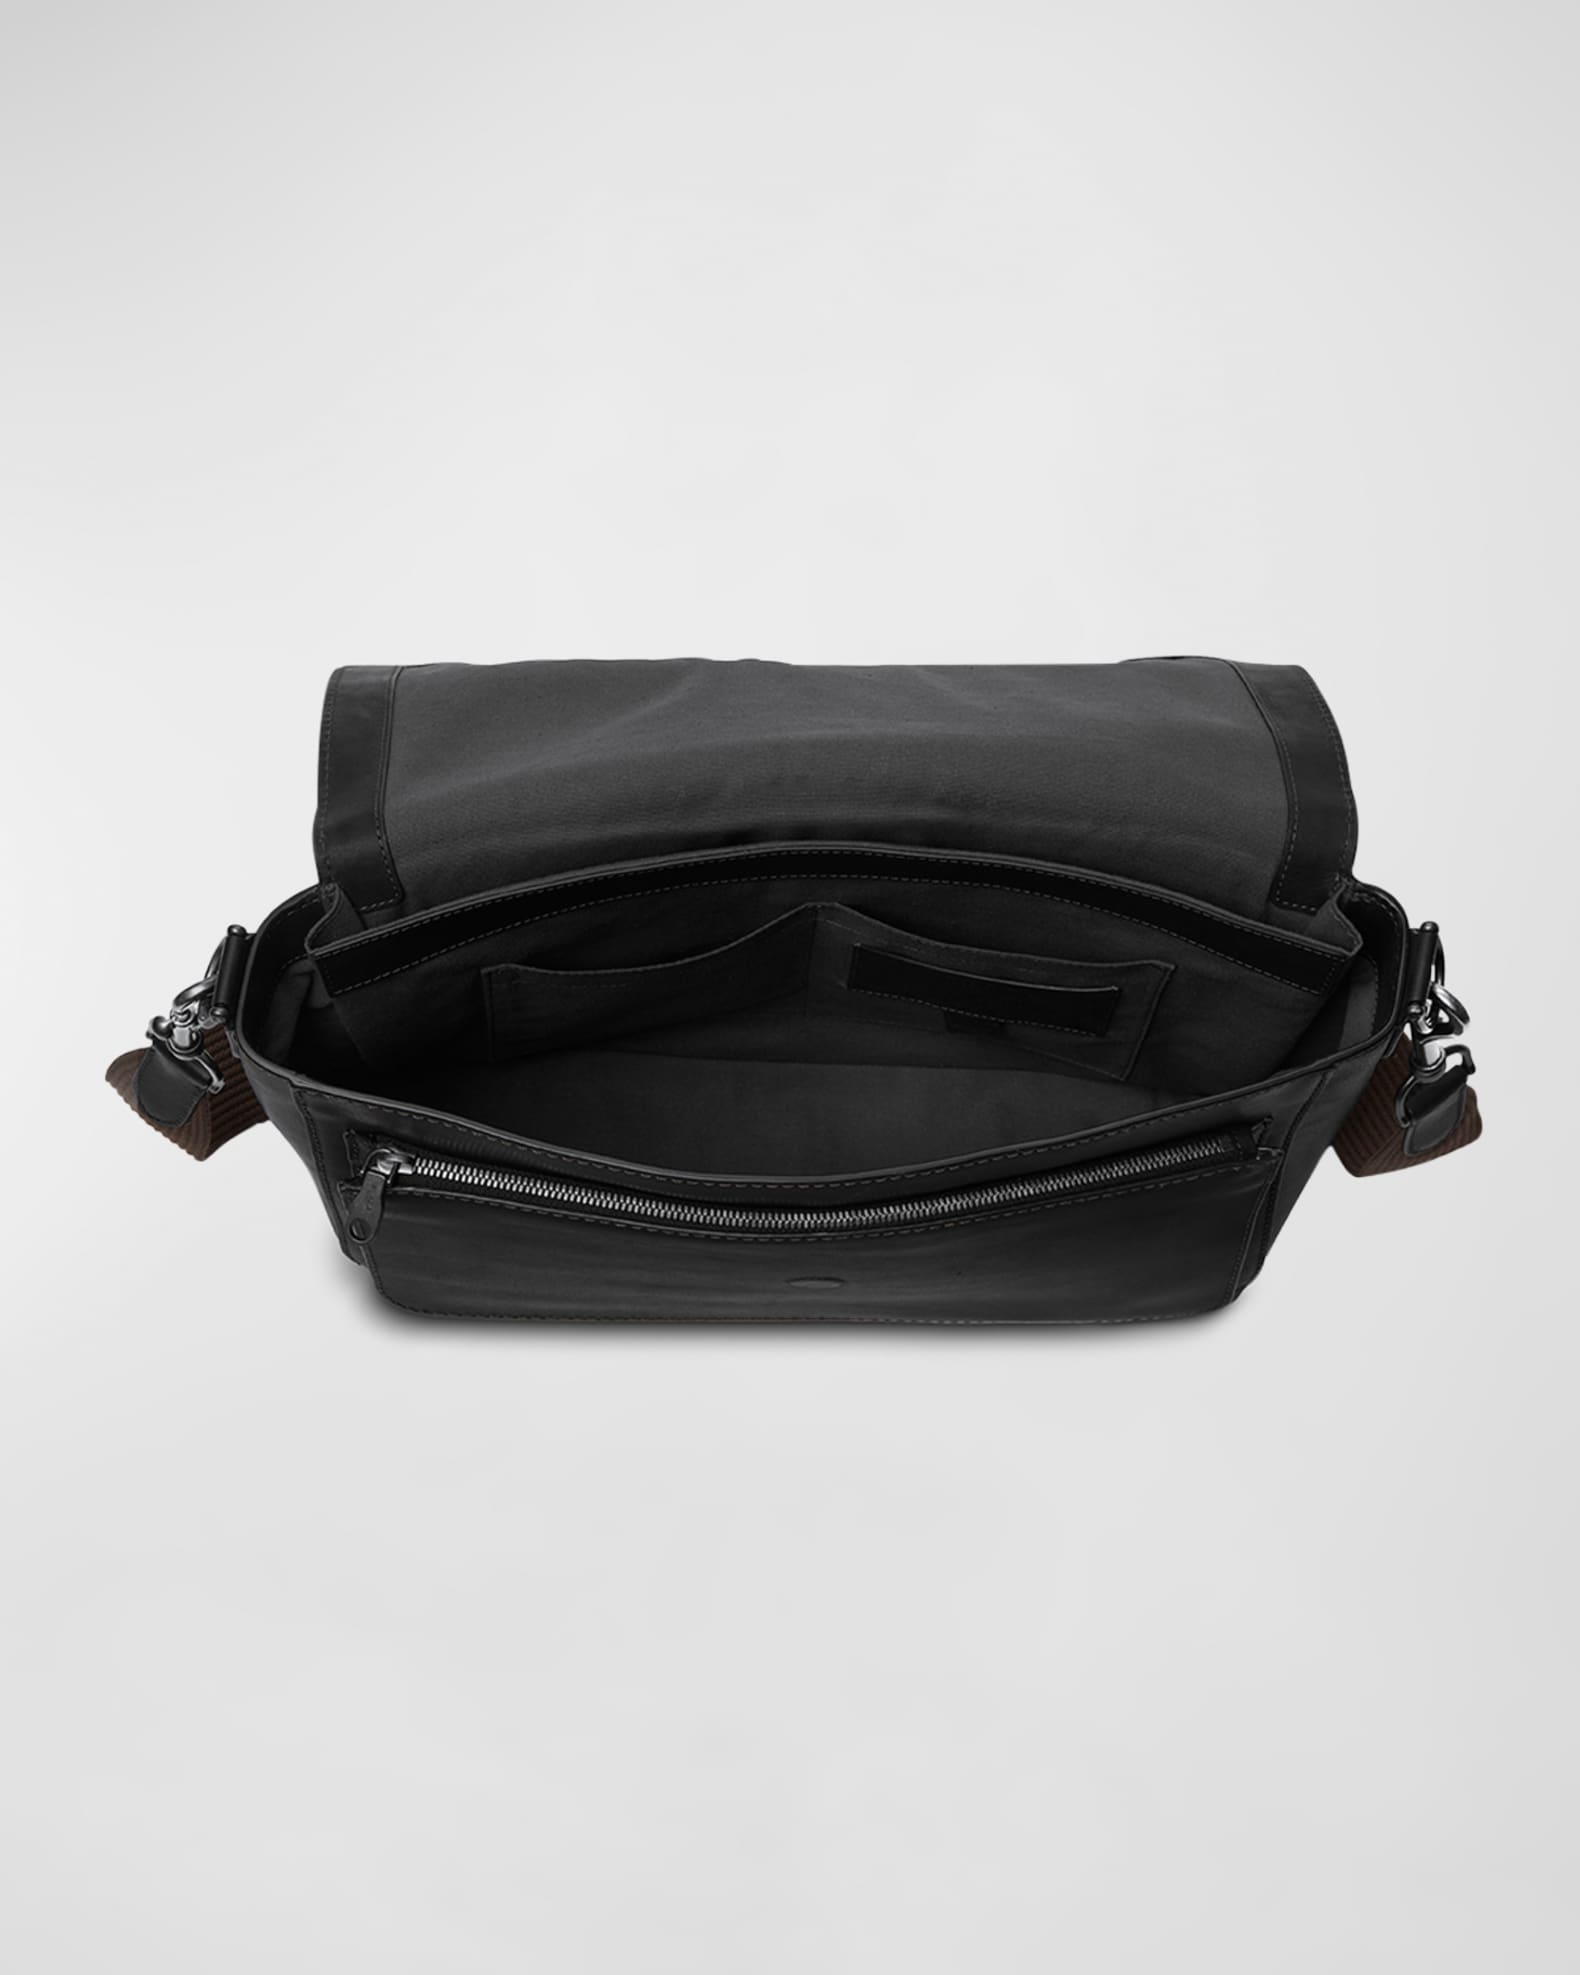 Shinola Men's Canfield Relaxed Leather Messenger Bag | Neiman Marcus